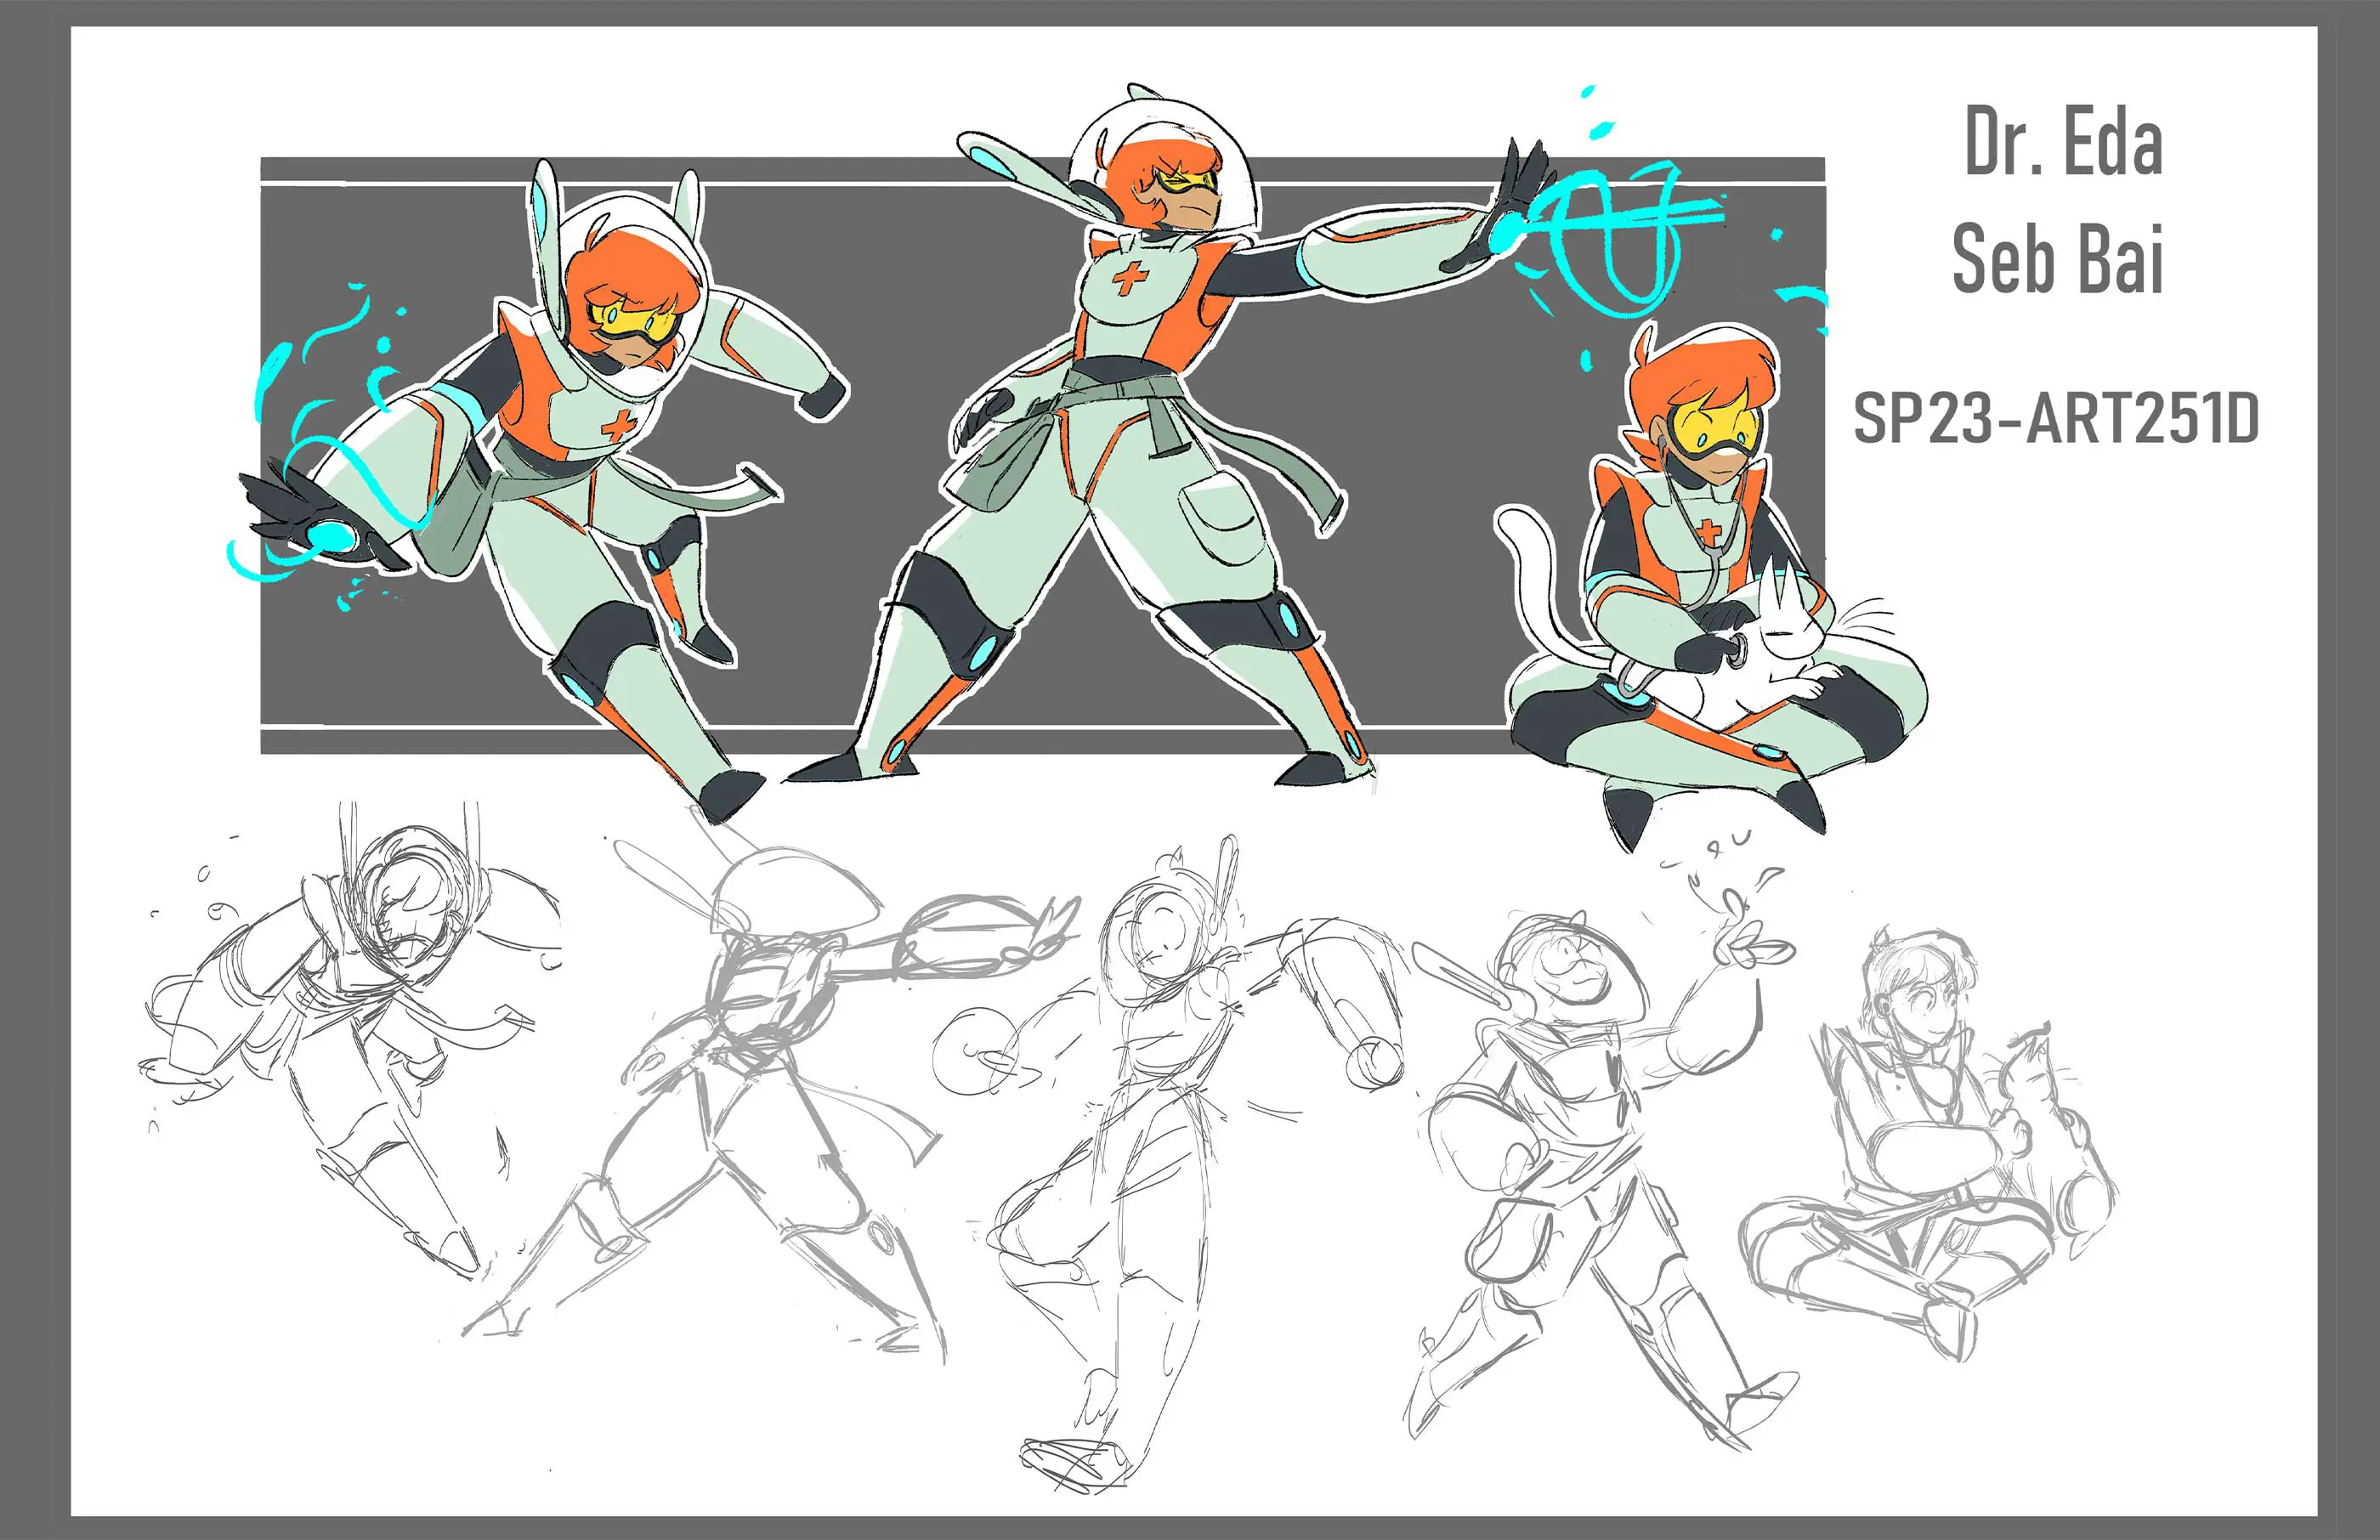 Drawings of a medic in space suit.